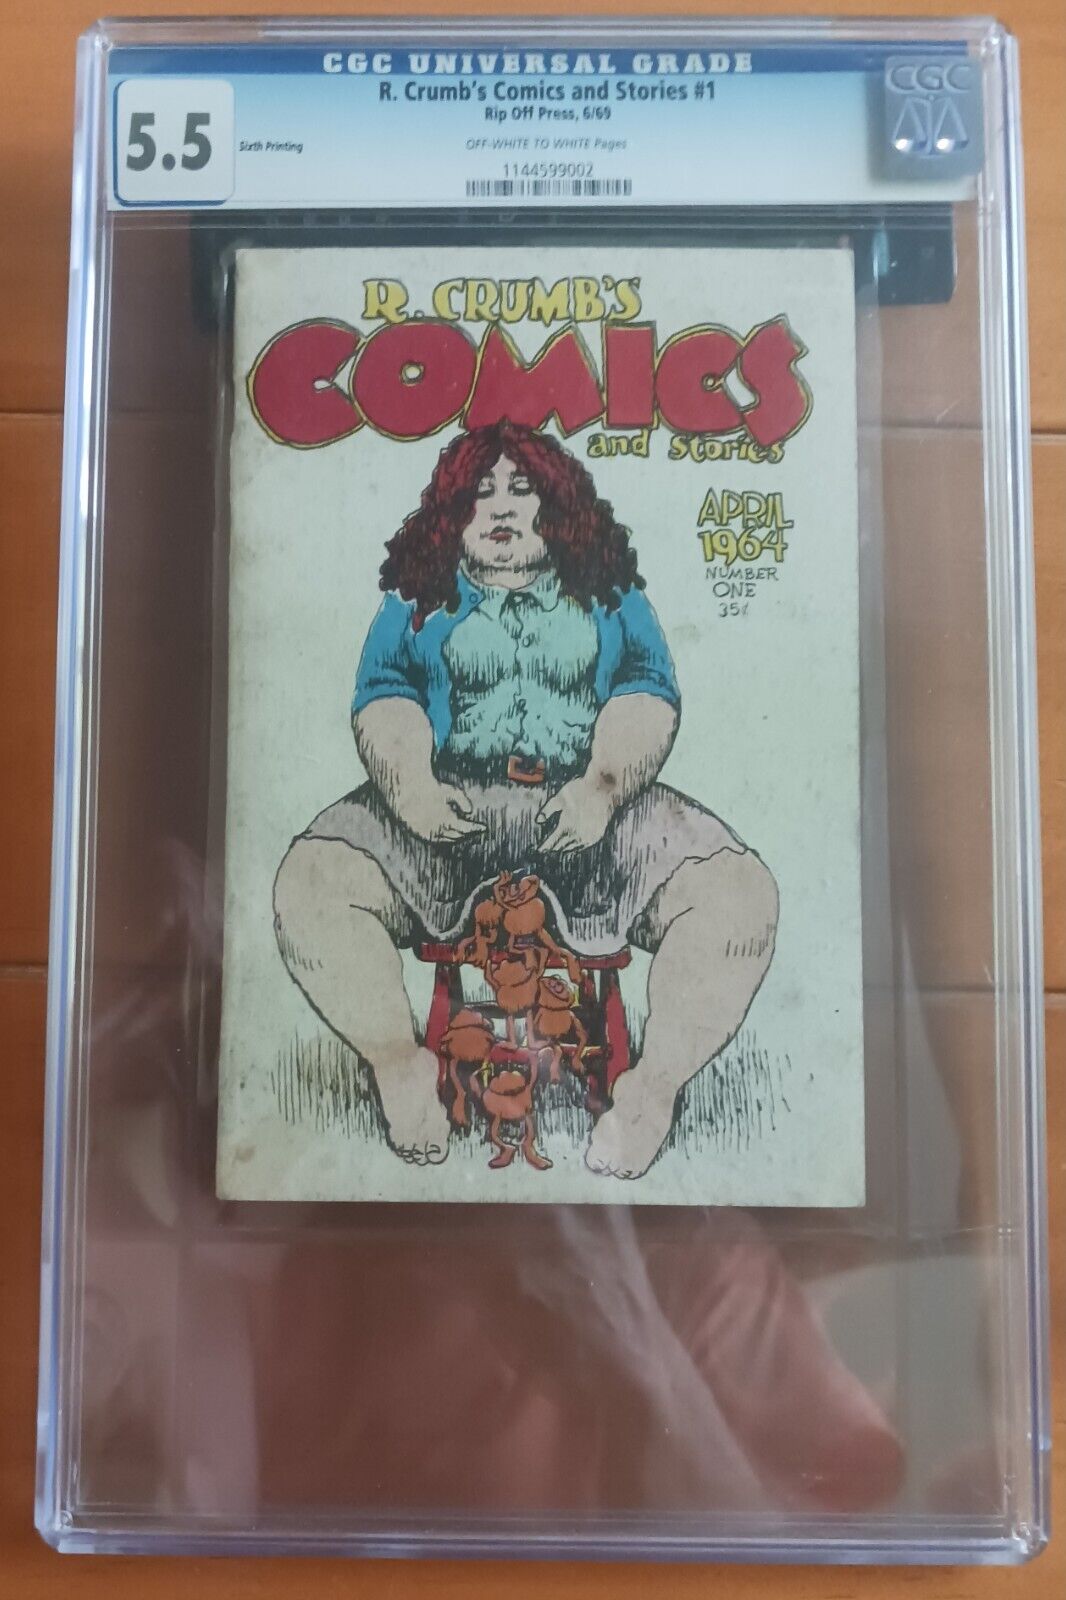 R. Crumbs and stories #1 1969 CGC Graded 5.5 sixth printing Rip Off Press LOOK